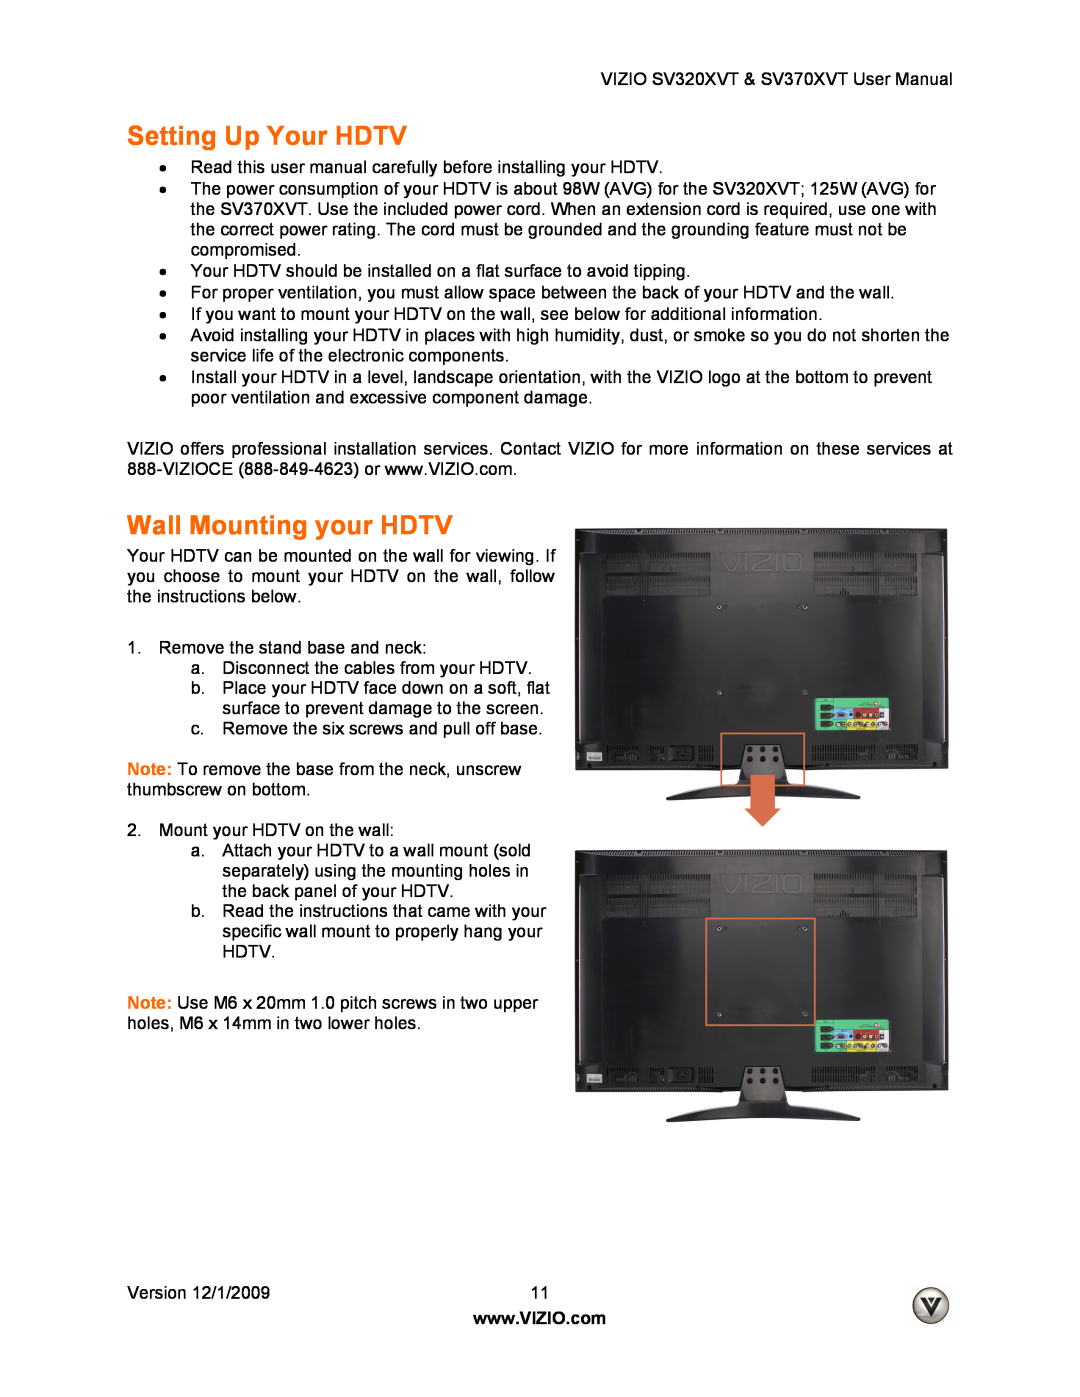 Vizio SV370XVT, SV320XVT user manual Setting Up Your HDTV, Wall Mounting your HDTV 